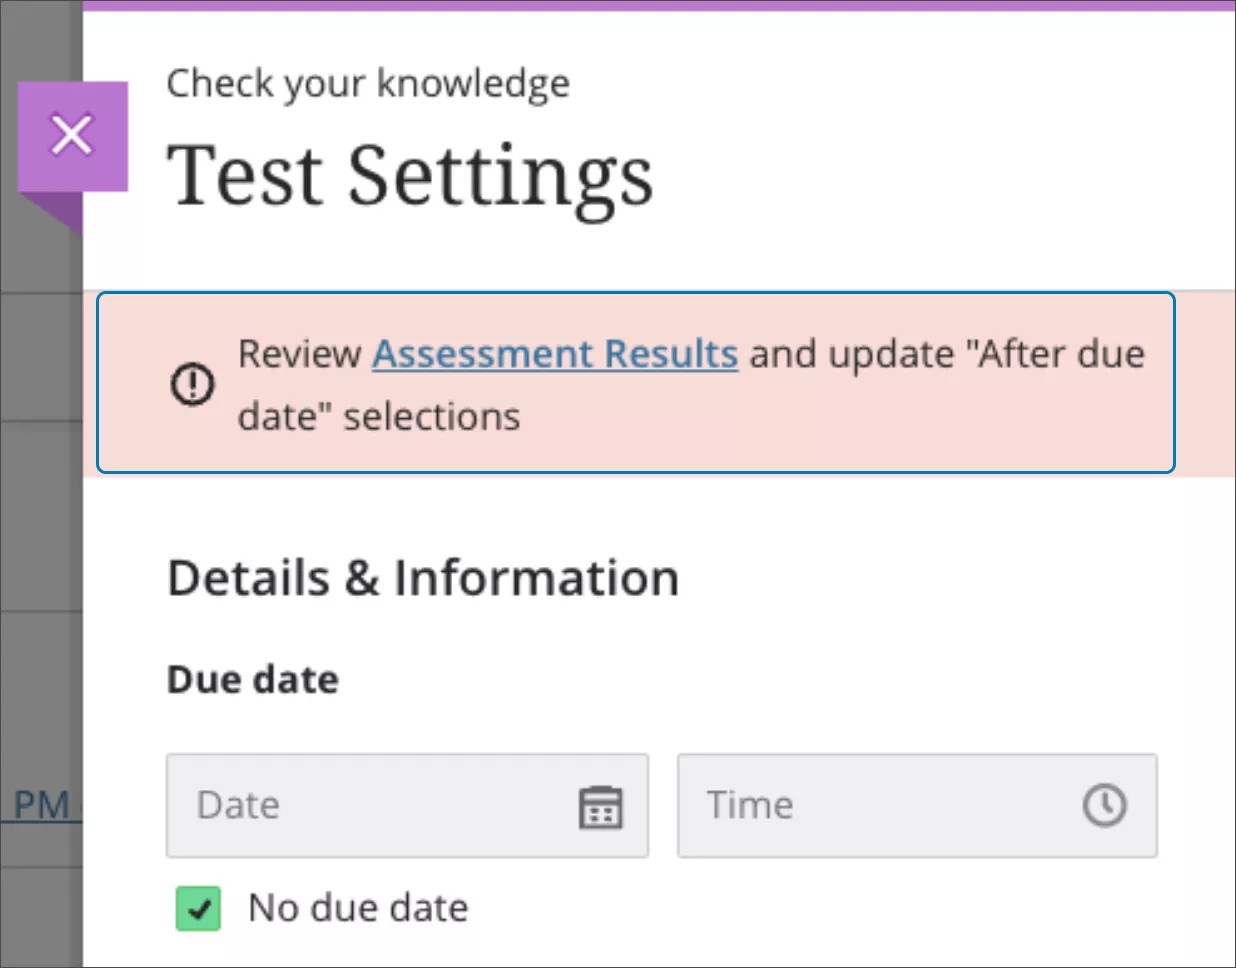 A warning banner appears when the "No due date" selection conflicts with Assessment Results settings